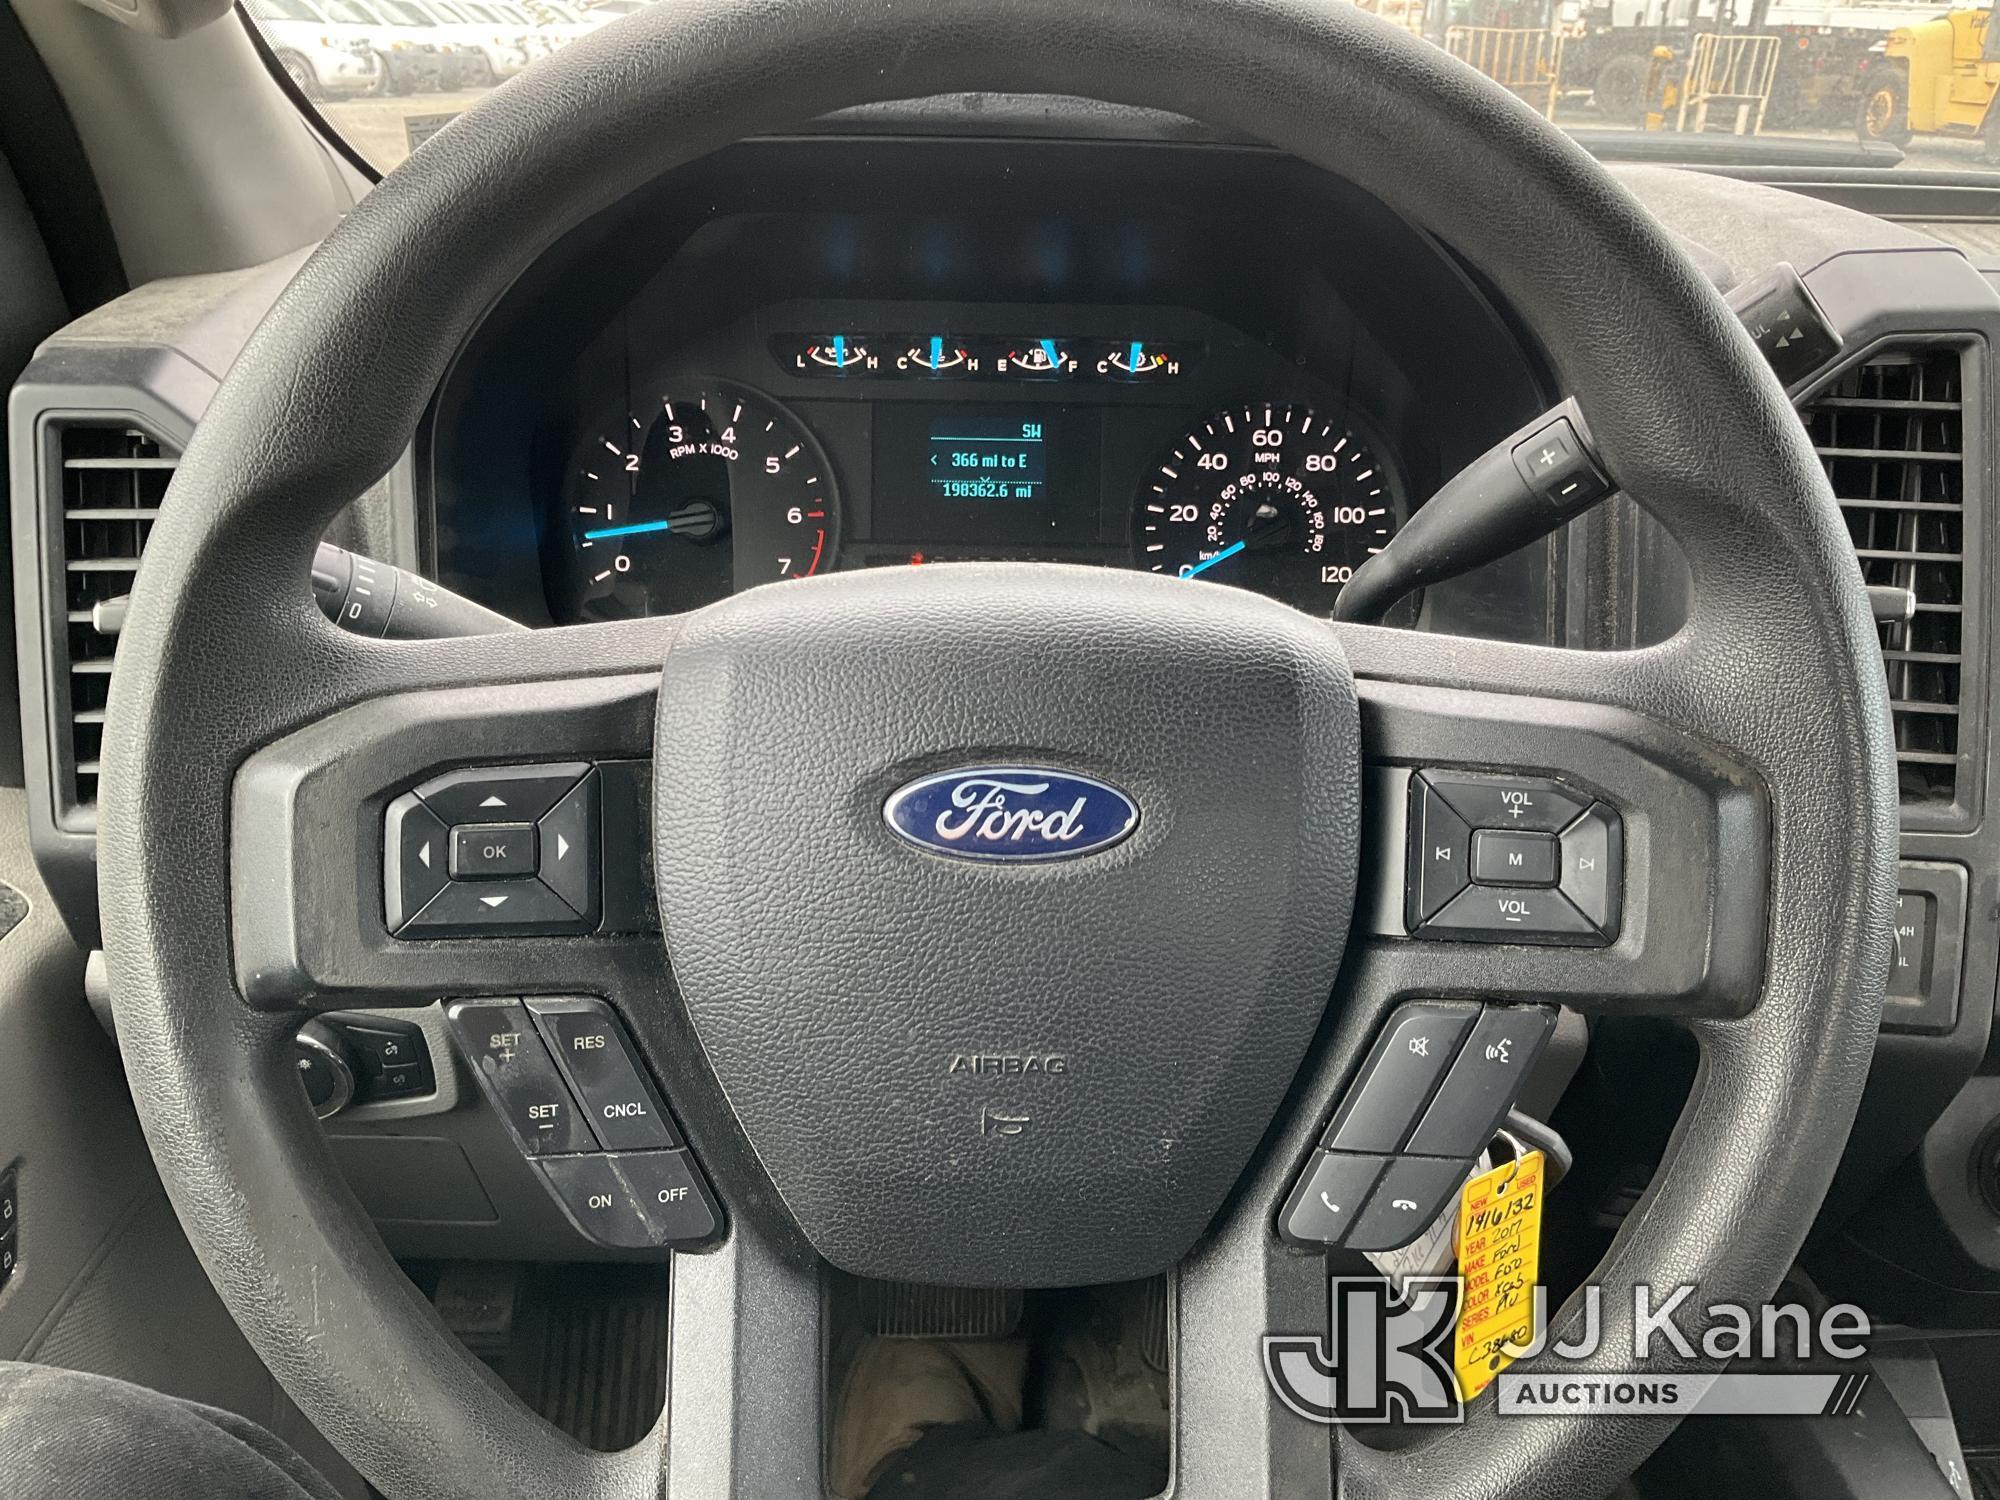 (Plymouth Meeting, PA) 2017 Ford F150 4x4 Extended-Cab Pickup Truck Runs & Moves, Bad Trans, Body &